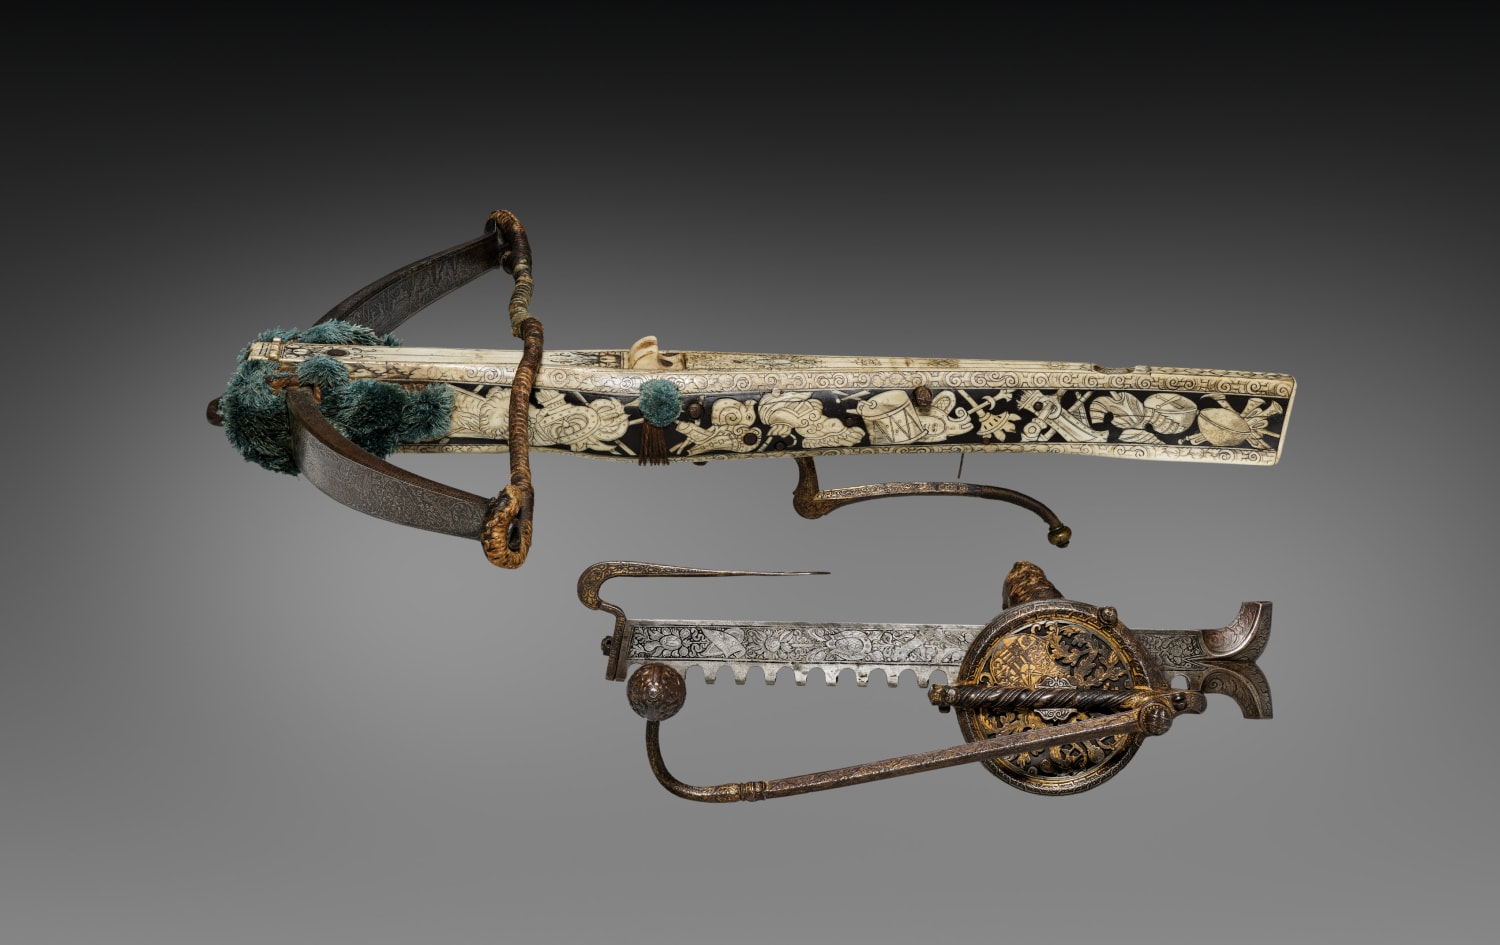 Crossbow and Cranequin of Elector Augustus I of Saxony. Germany, Saxony, c. 1553–73